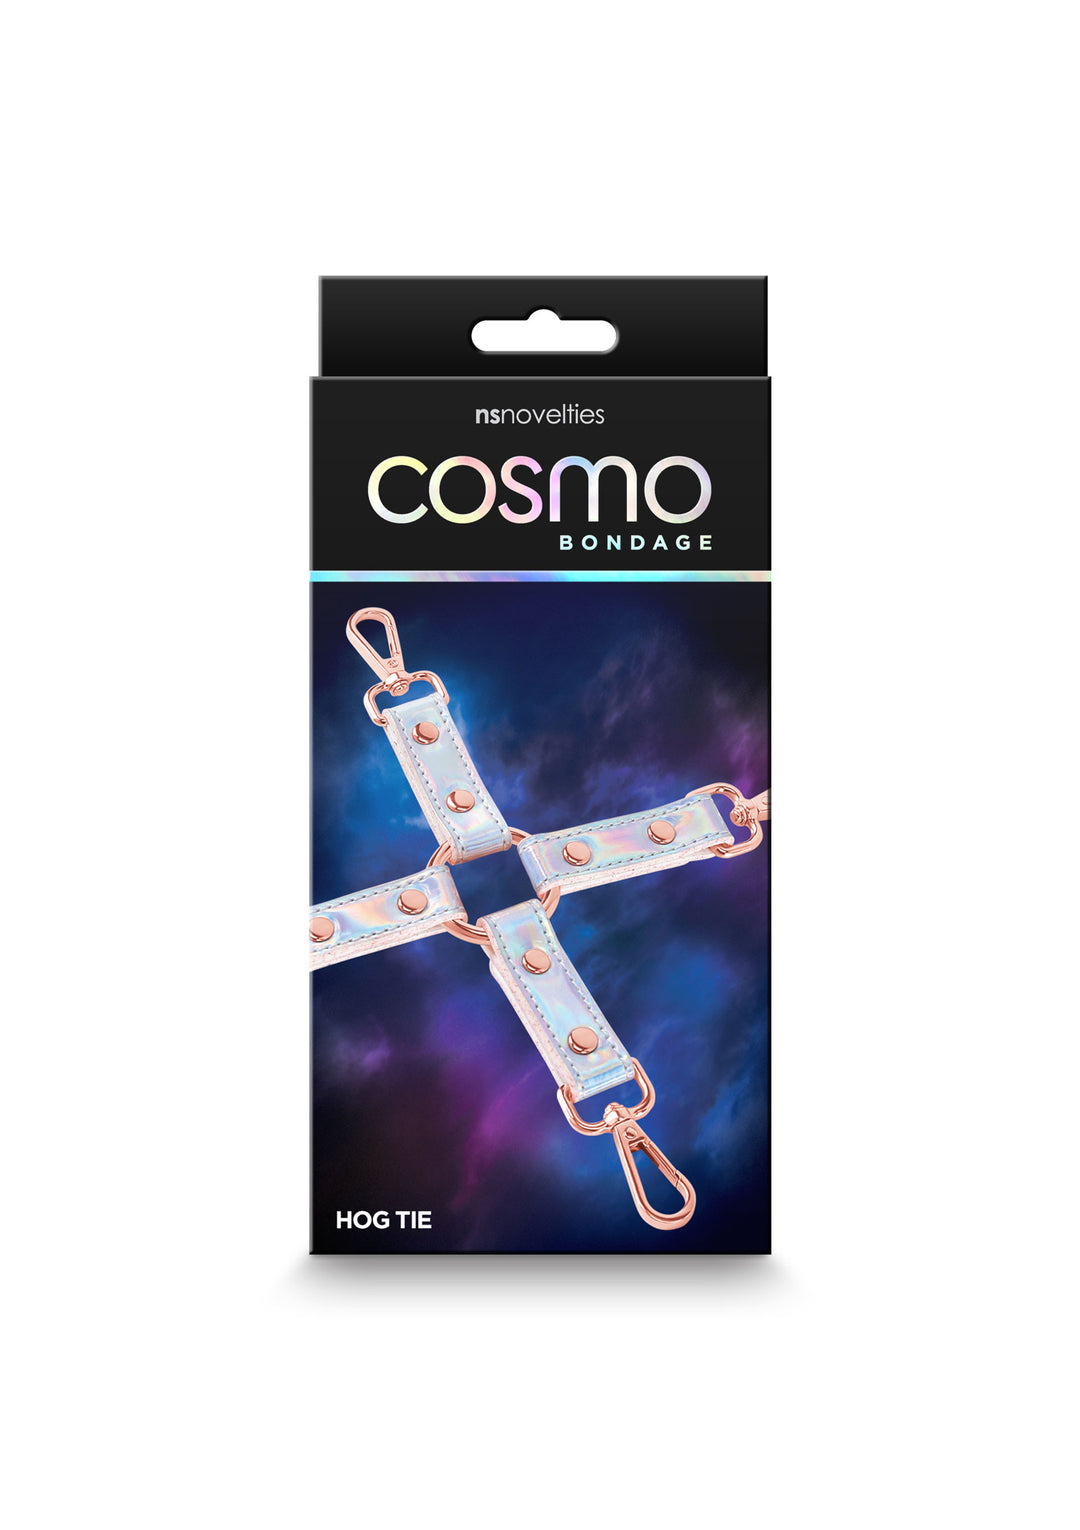 Cosmo Bondage Hogtie handcuff and anklet accessory